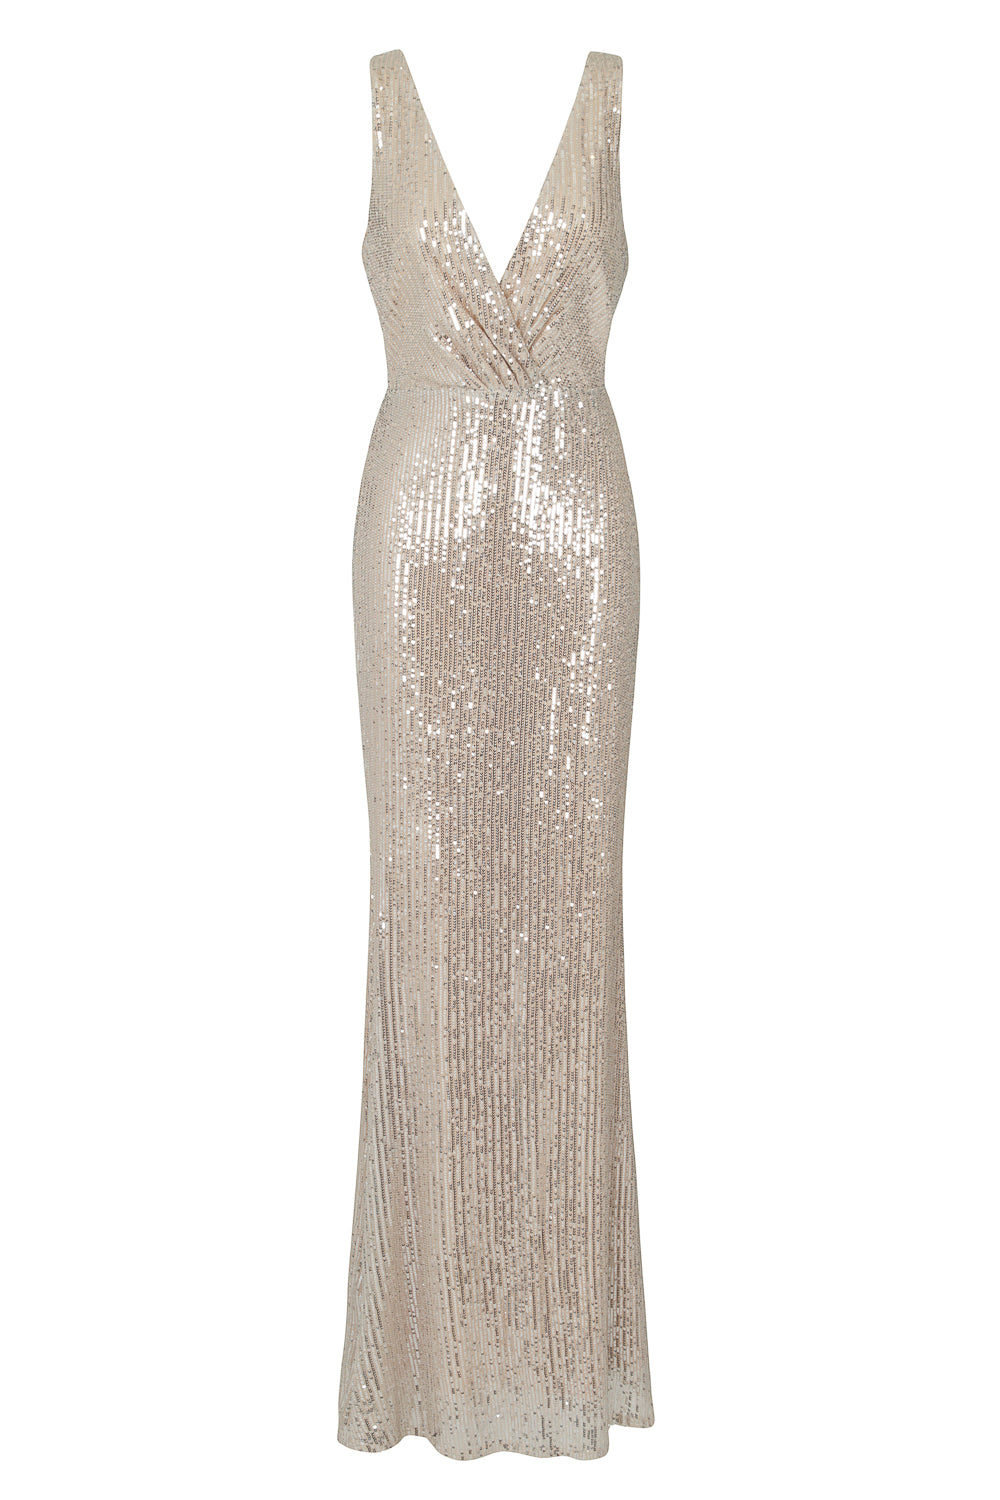 The One Silver Sequin Plunge Backless Maxi Dress